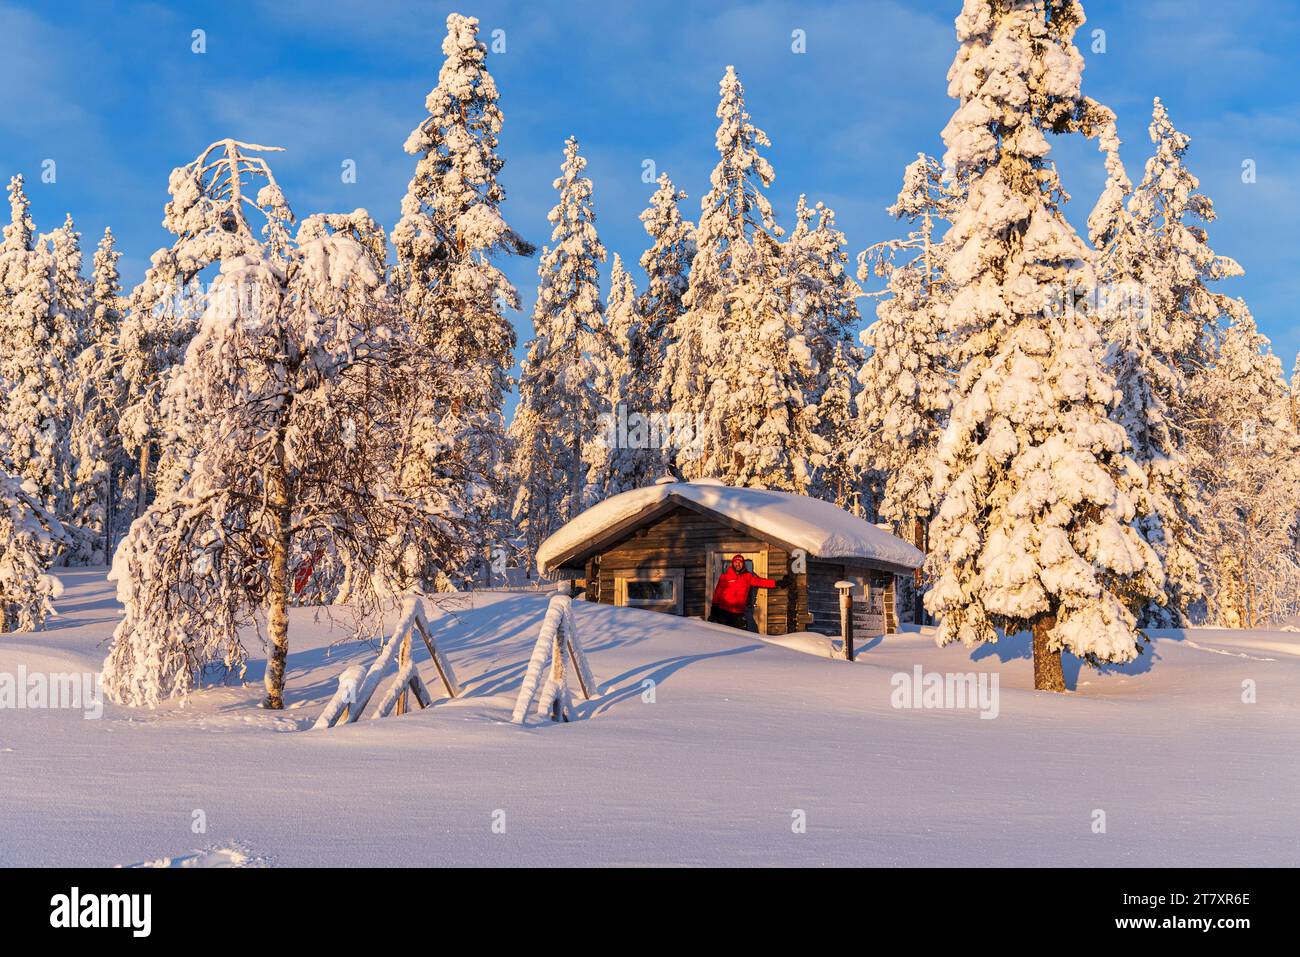 Tourist in the early morning sun stands in front of an isolated chalet in the snowy forest, Norrbotten, Swedish Lapland, Sweden, Scandinavia, Europe Stock Photo